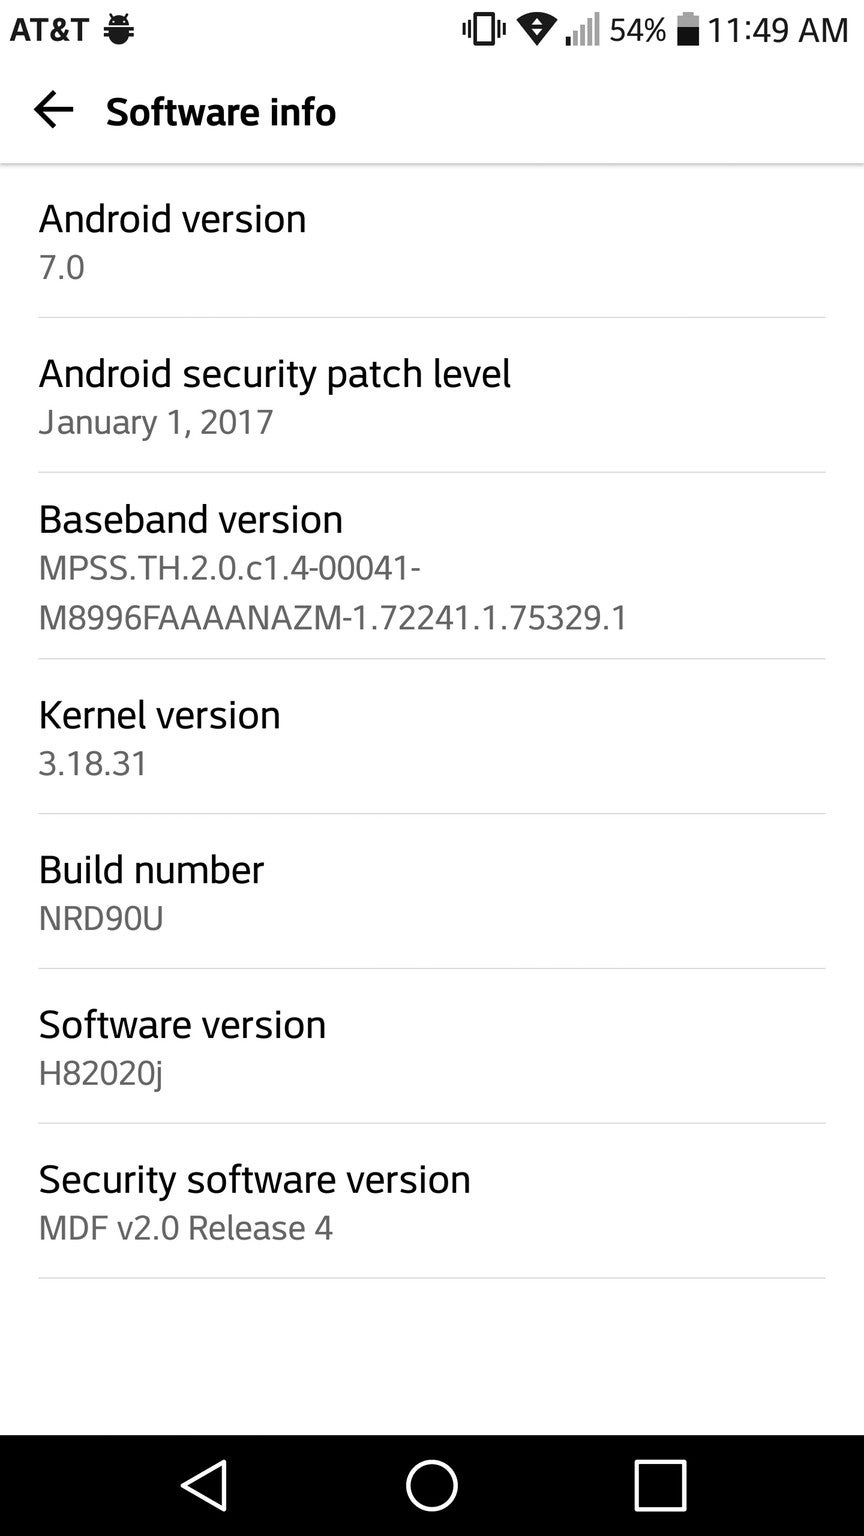 Android 7.0 Nougat for AT&amp;T LG G5 - AT&T starts rolling out Android 7.0 Nougat update for LG G5